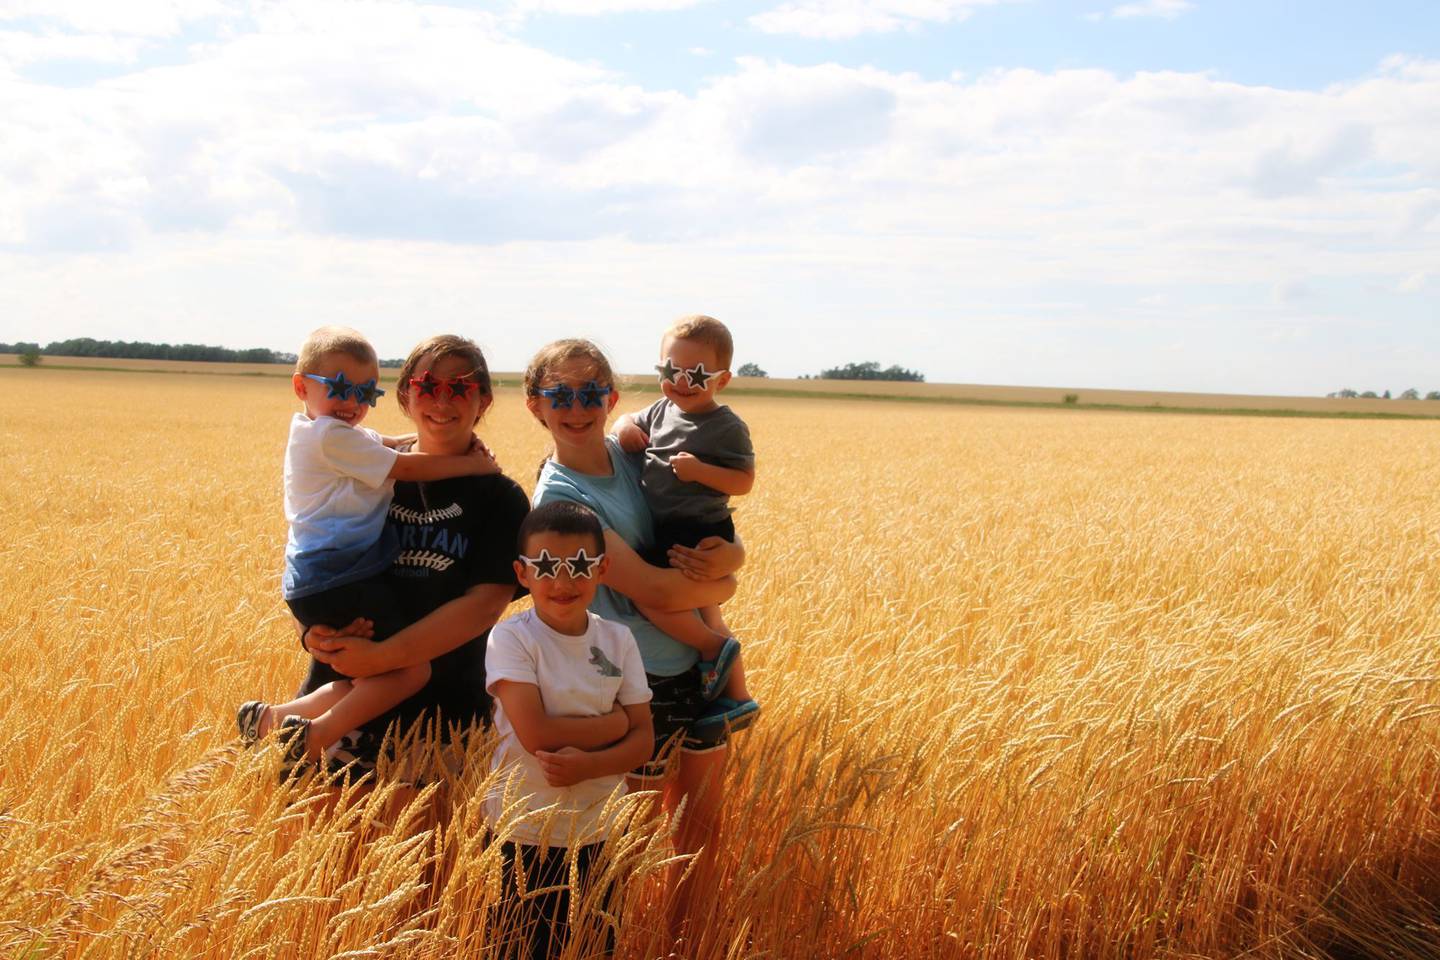 “Our Legacy” — Corrine Crawford: “Standing in our ‘amber waves of grain’ are our five grandchildren, who are the legacy of our farm.”